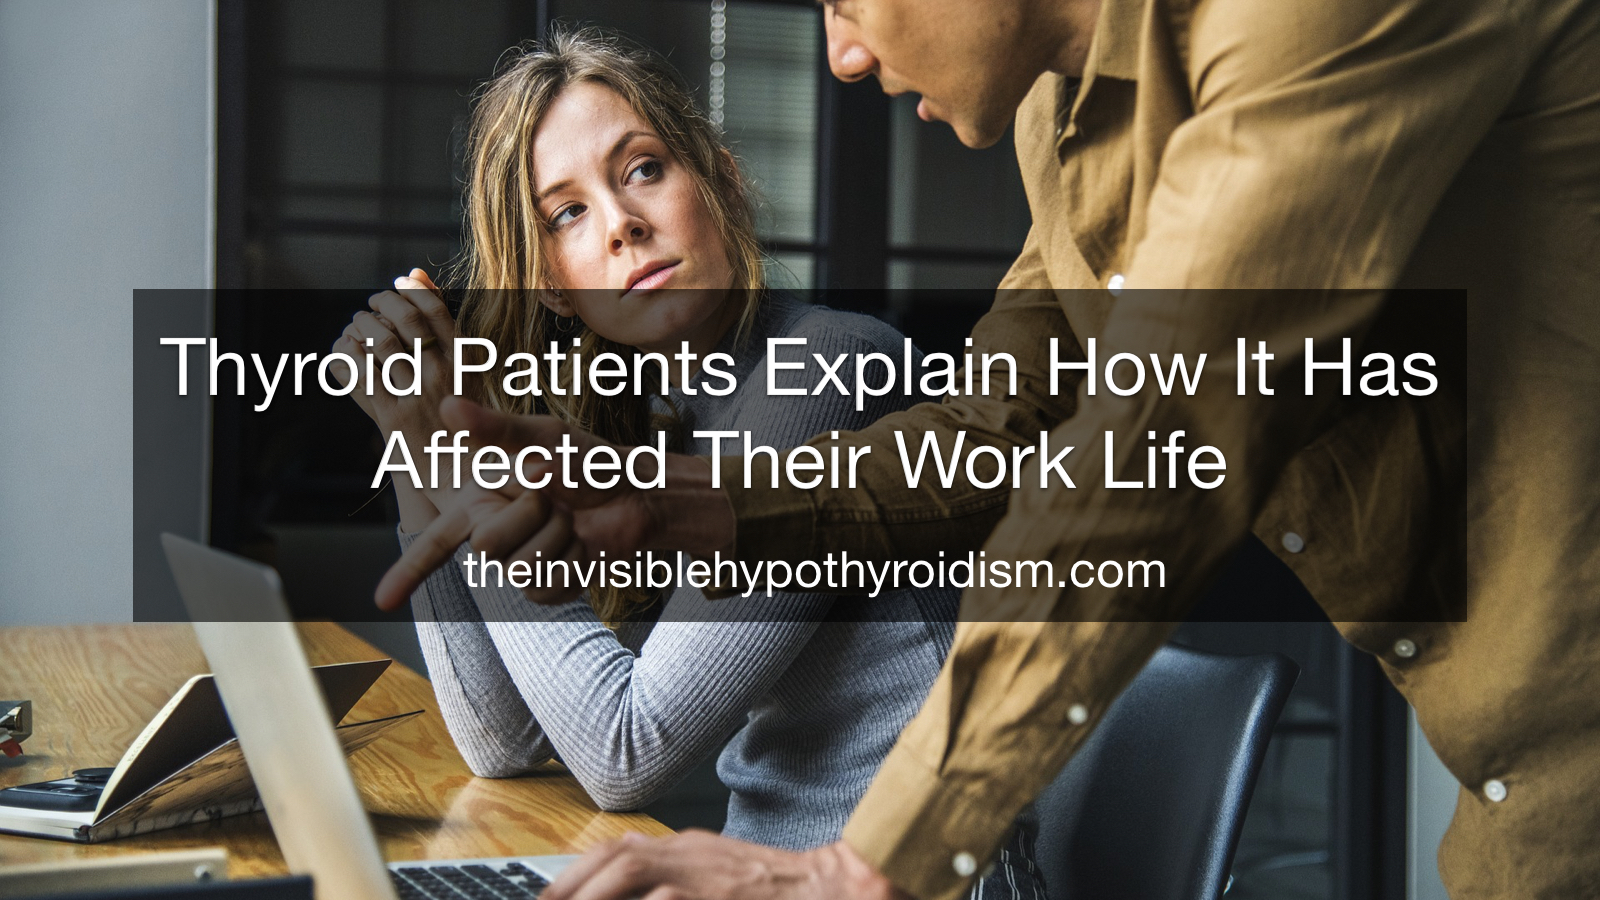 Thyroid Patients Explain How It Has Affected Their Work Life